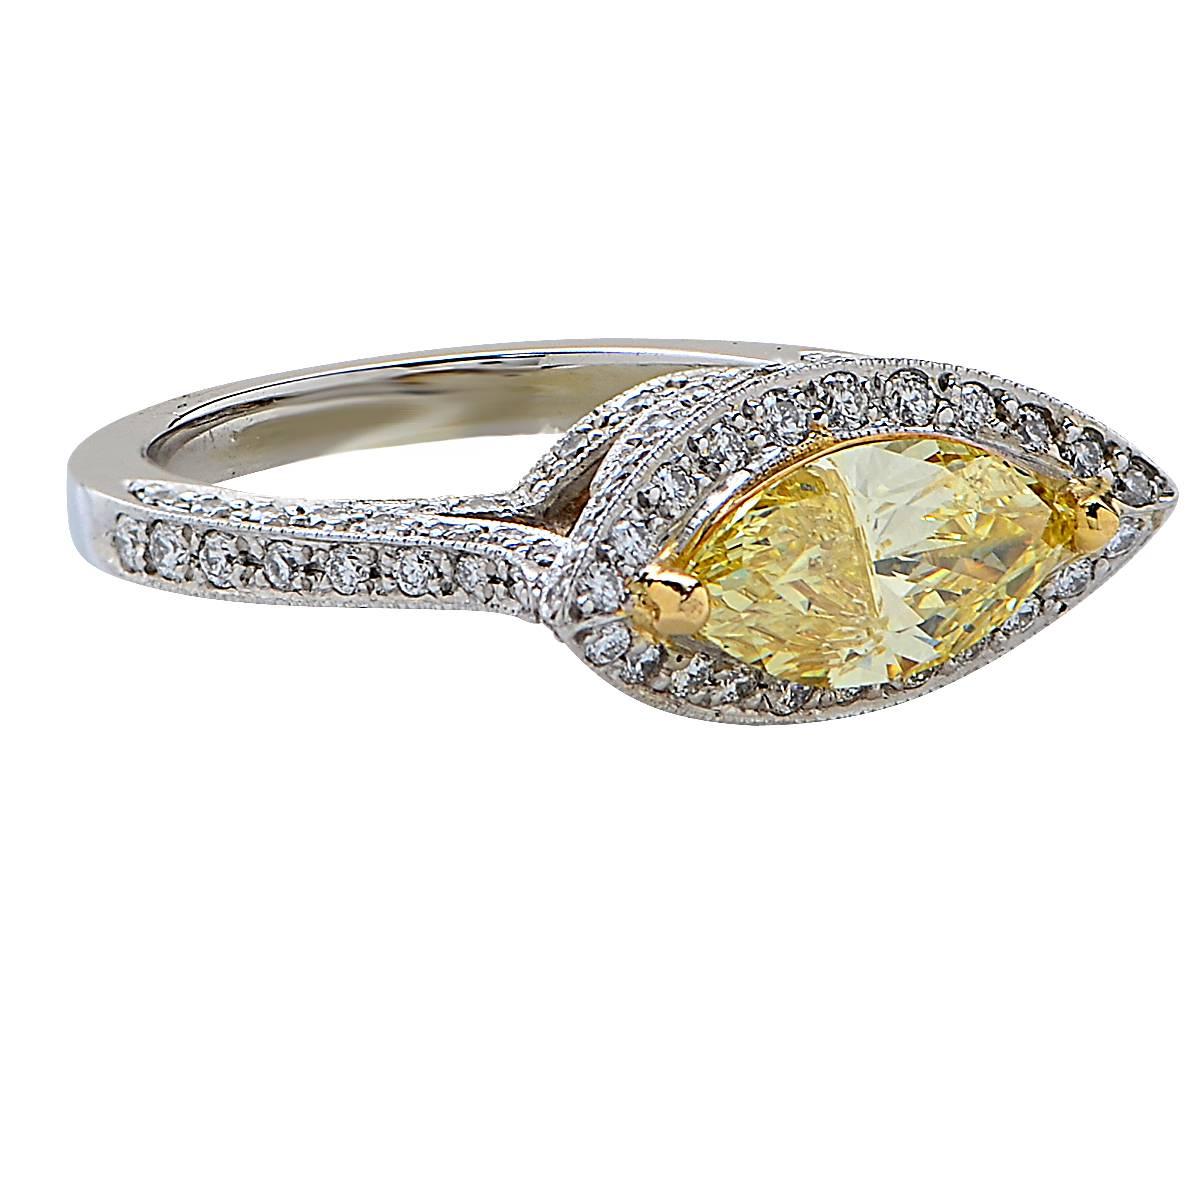 1.22 Carat GIA Graded Fancy Yellow Marquise Cut Diamond Set in a Platinum Ring Accented by 110 Round Brilliant Cut Diamonds Weighing Approximately .65 Carats, F Color, VS Clarity. Total Diamond Weight 1.87 Carats.